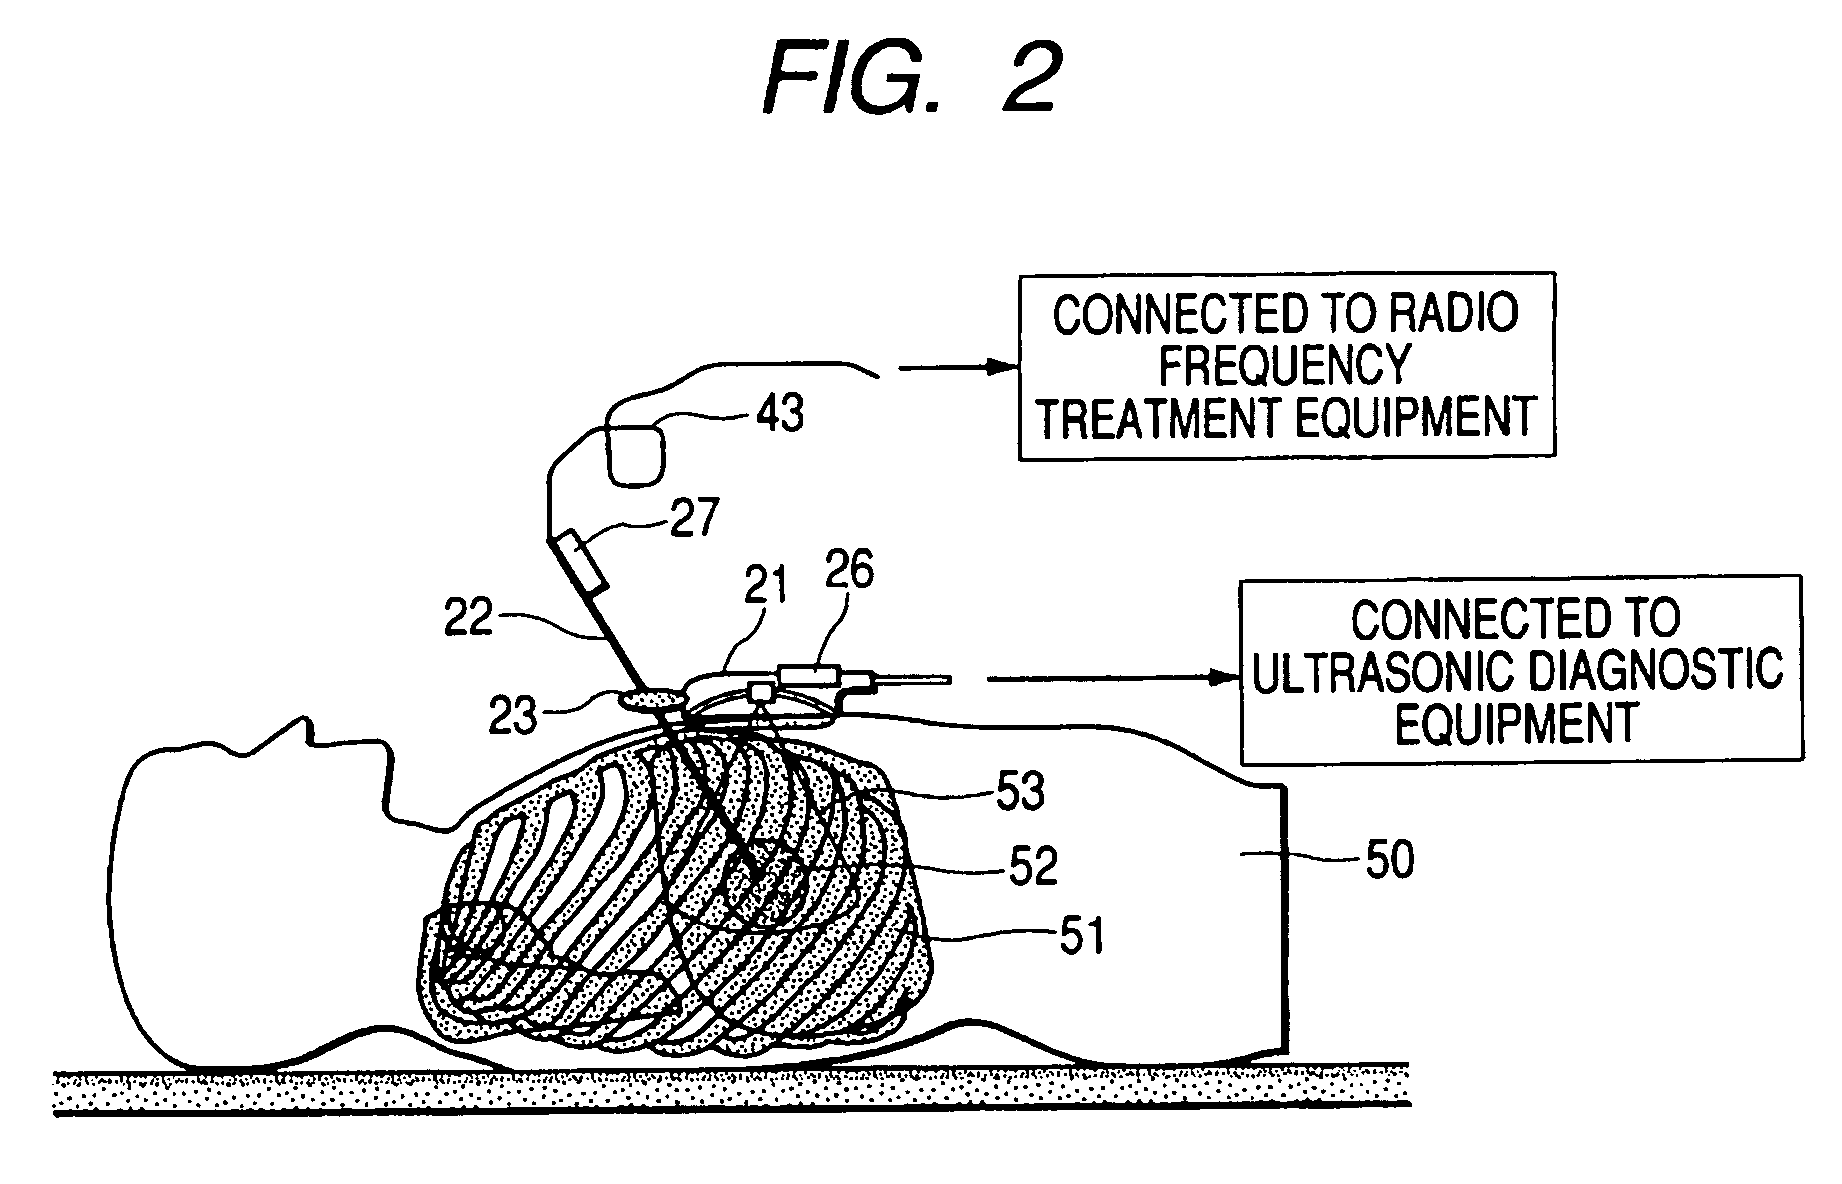 Ultrasonic diagnostic apparatus for fixedly displaying a puncture probe during 2D imaging